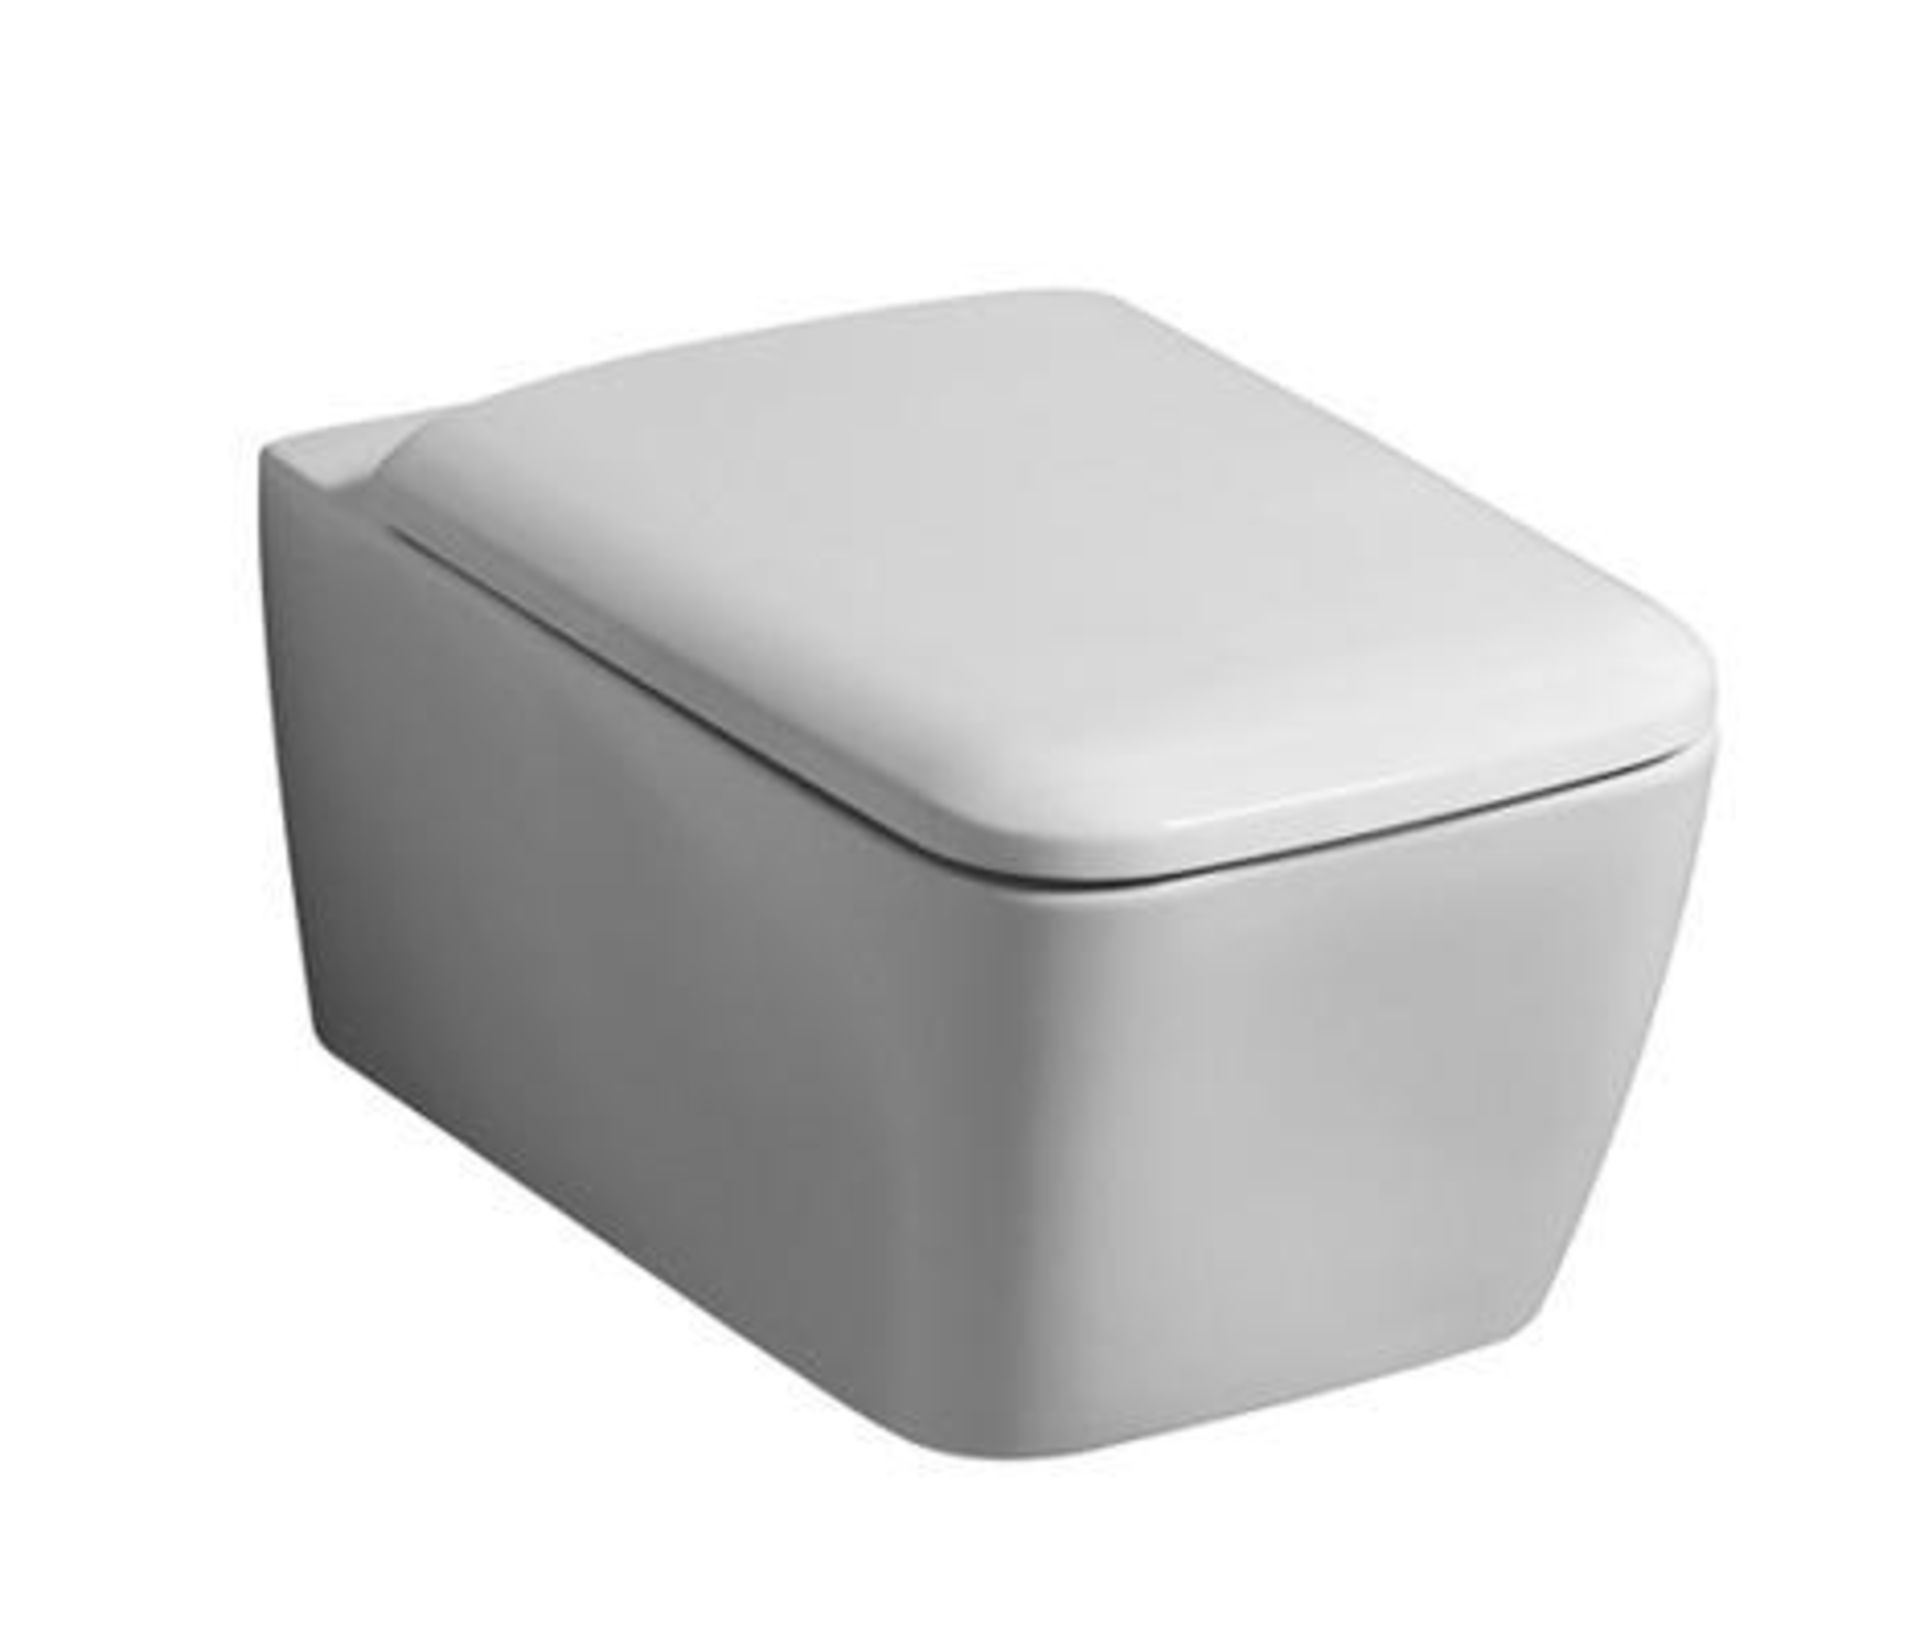 Keramag It! Back to wall Toilet Pan. The complete bathroom it!Brings clear modernity to the bat... - Image 2 of 2